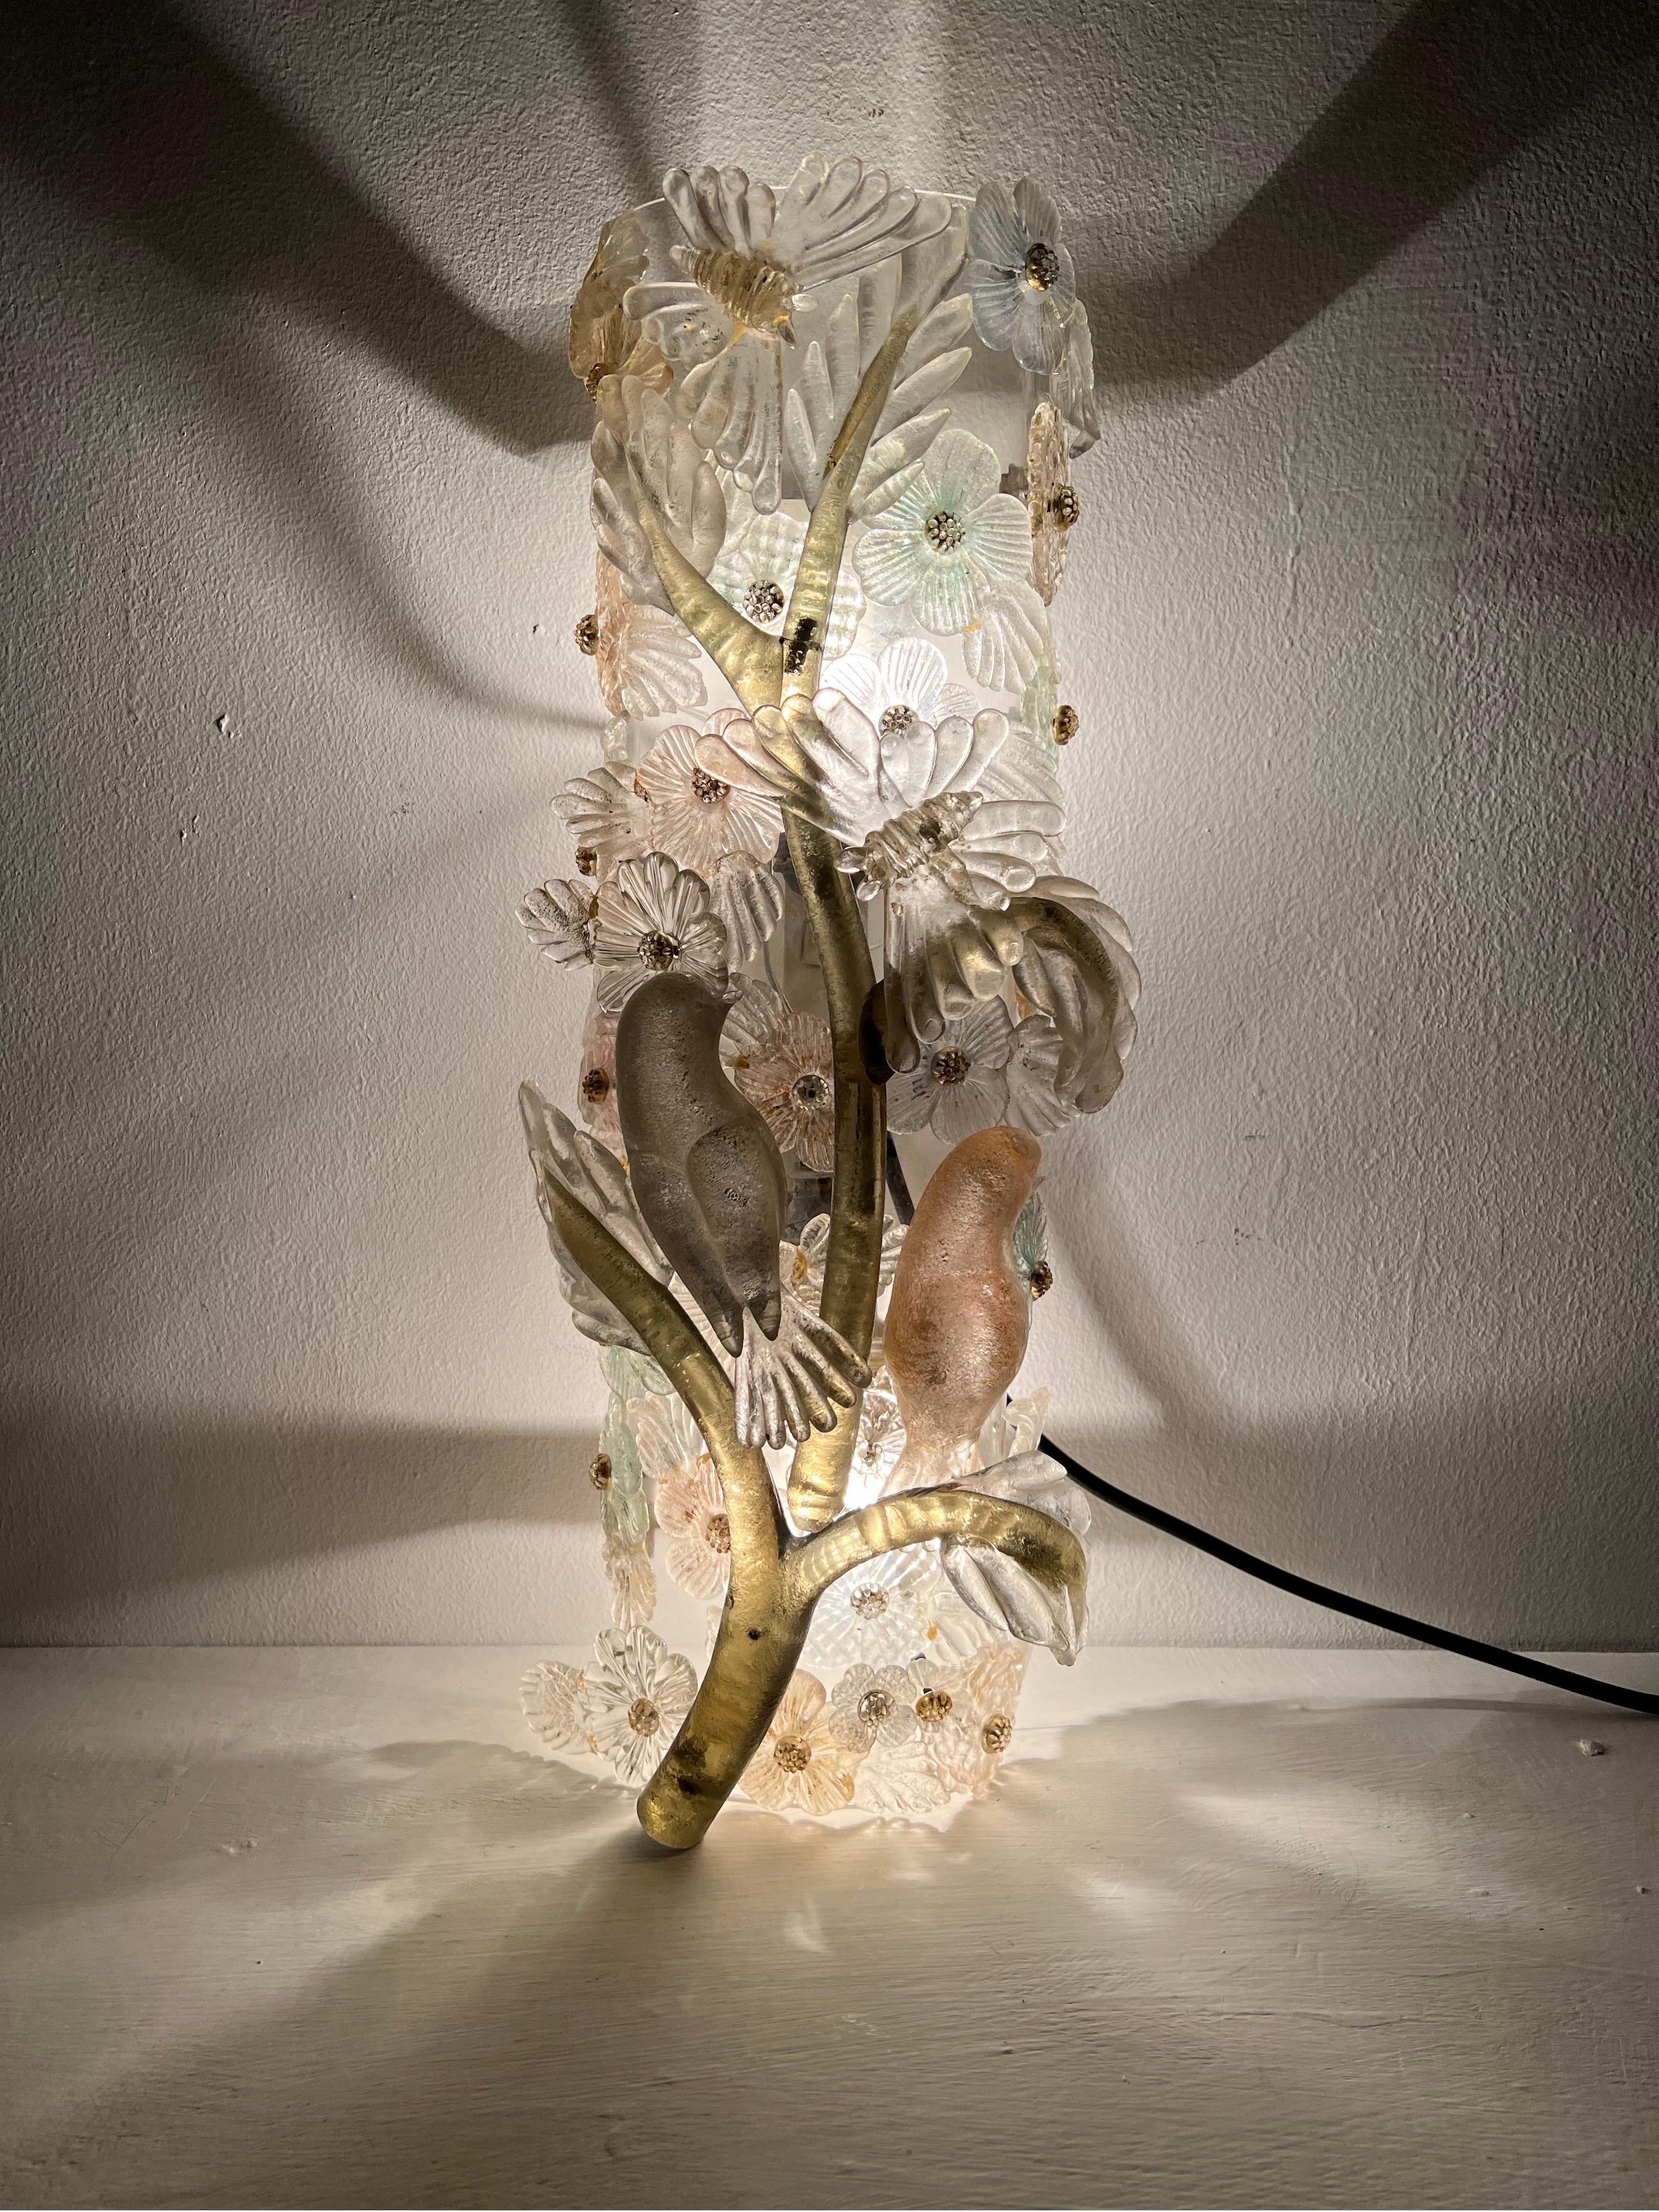 Magnificent figural Sconce in Murano glass, quite unique and a proper work of art on its own, representing a branch with 2 birds, 2 butterflies and several different styles of flowers, all are hand sculpted with 24k gold leaf or dust applied and